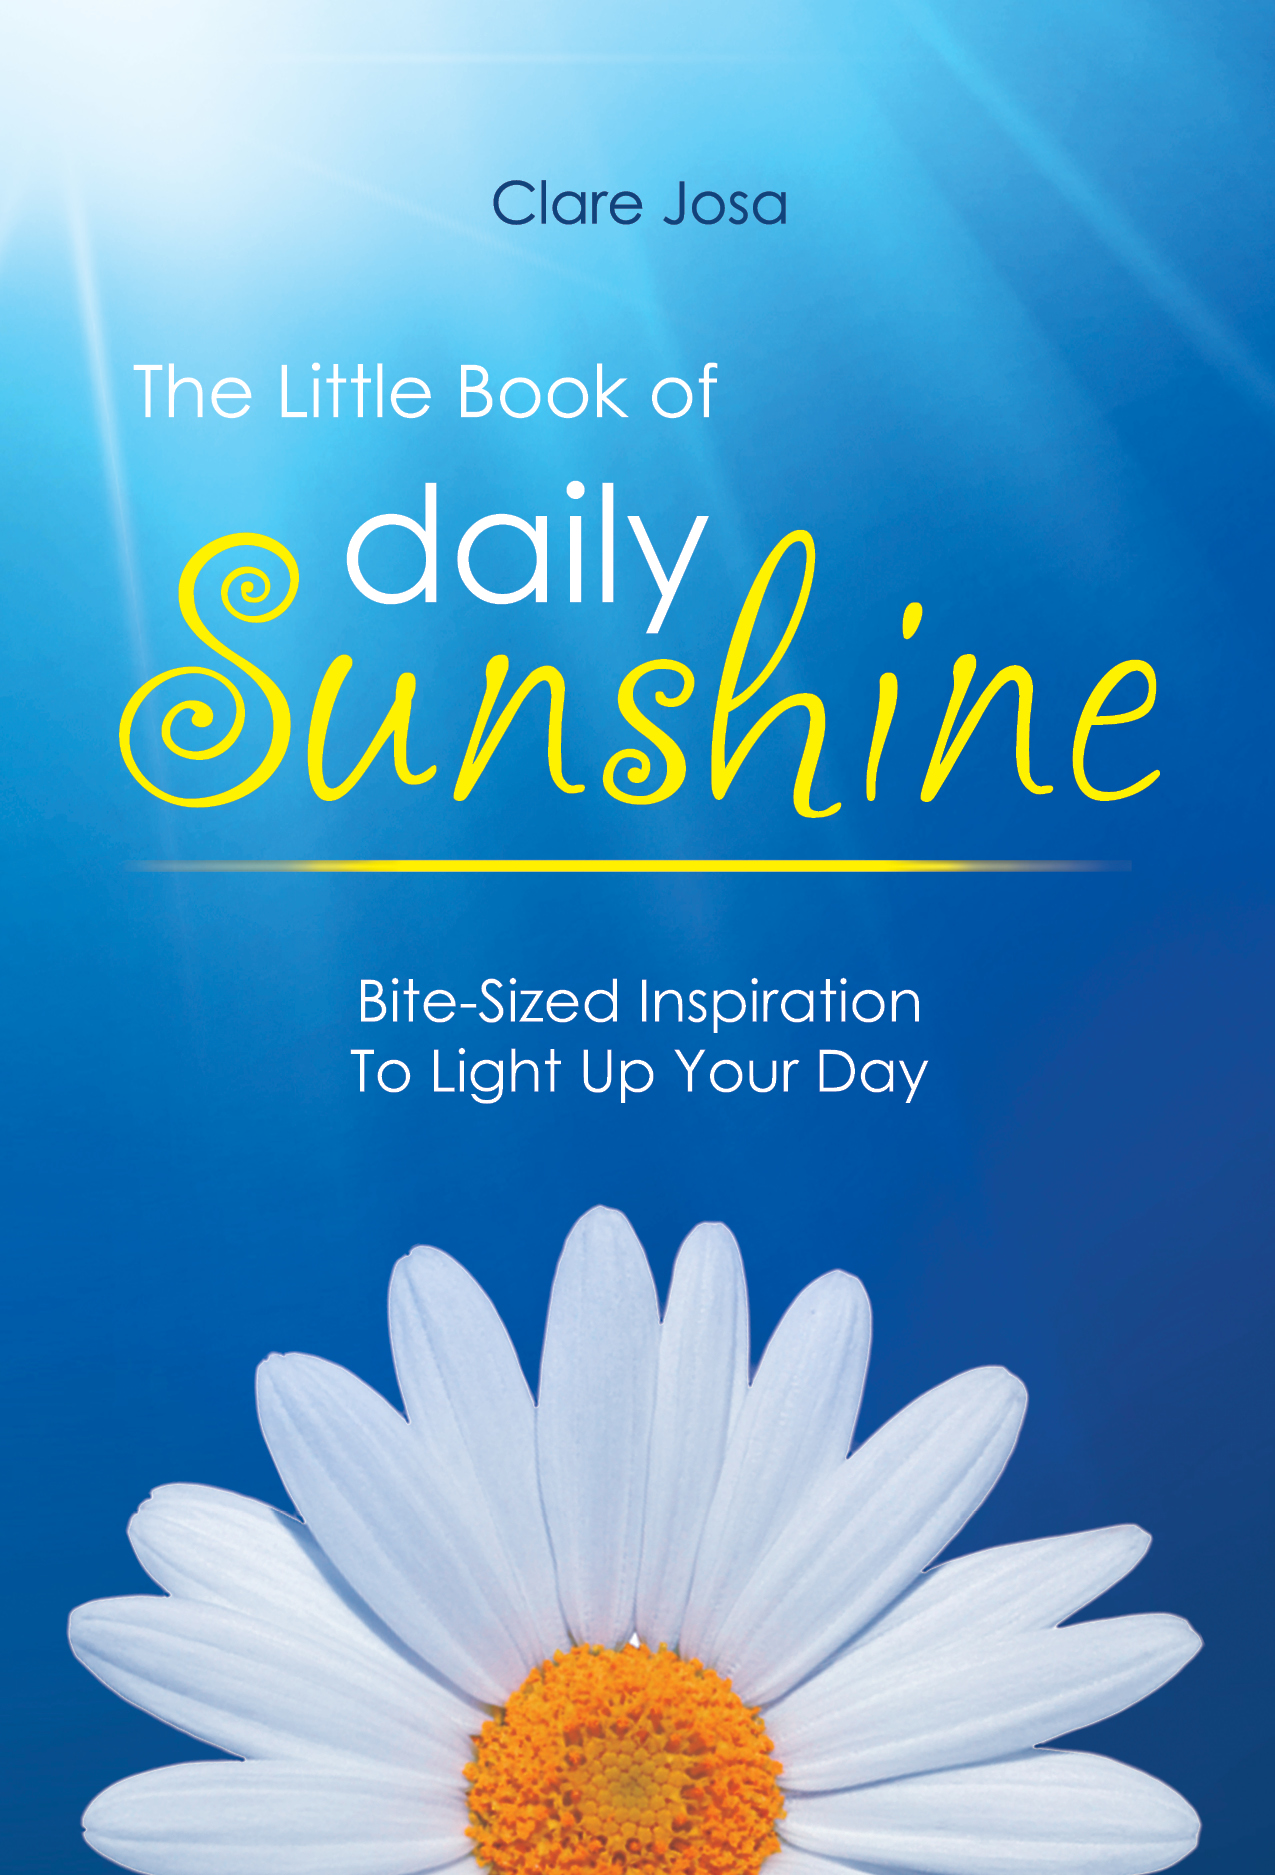 The Little Book Of Daily Sunshine - ISBN 978-1908854407